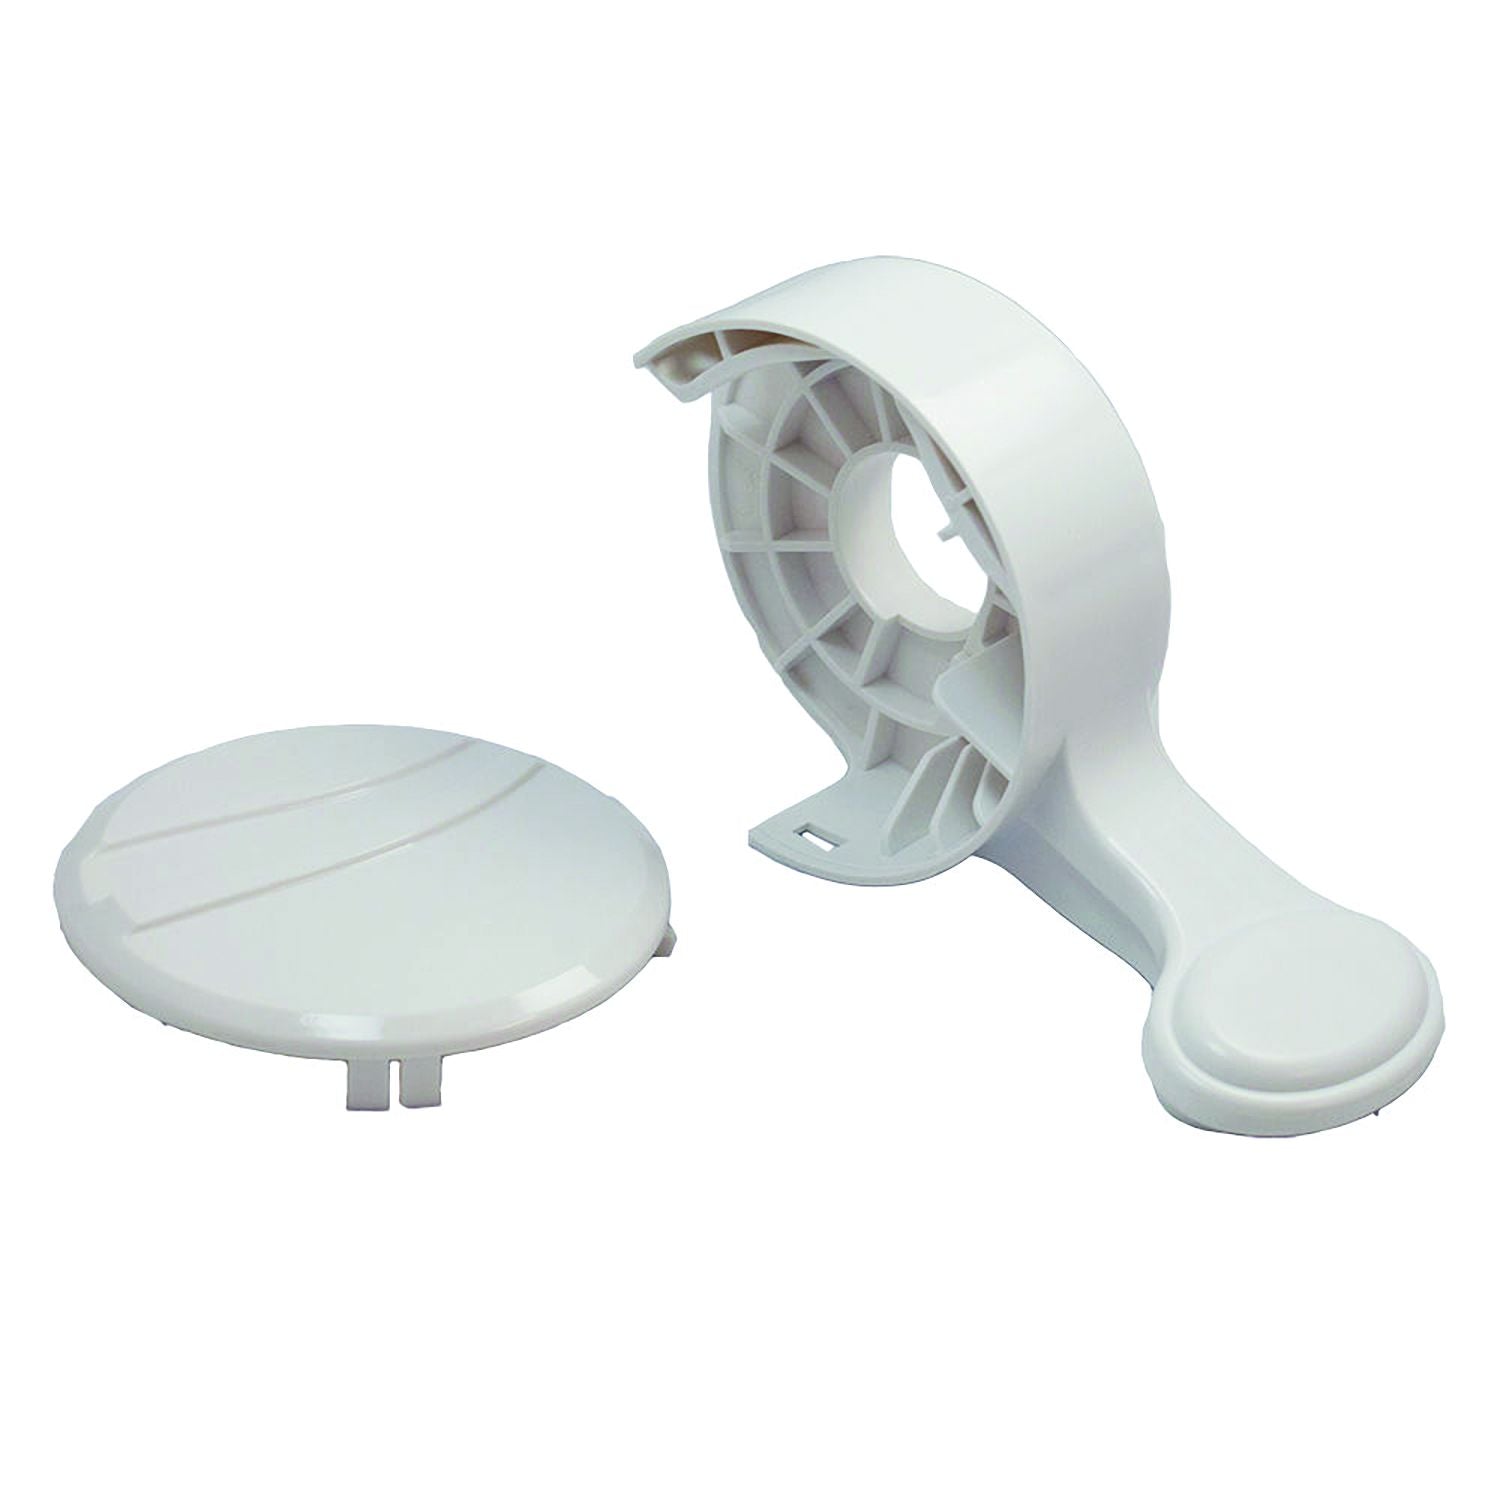 Dometic 385311119 - Pedal and Cap for Dometic Toilets Traveler Lite 210